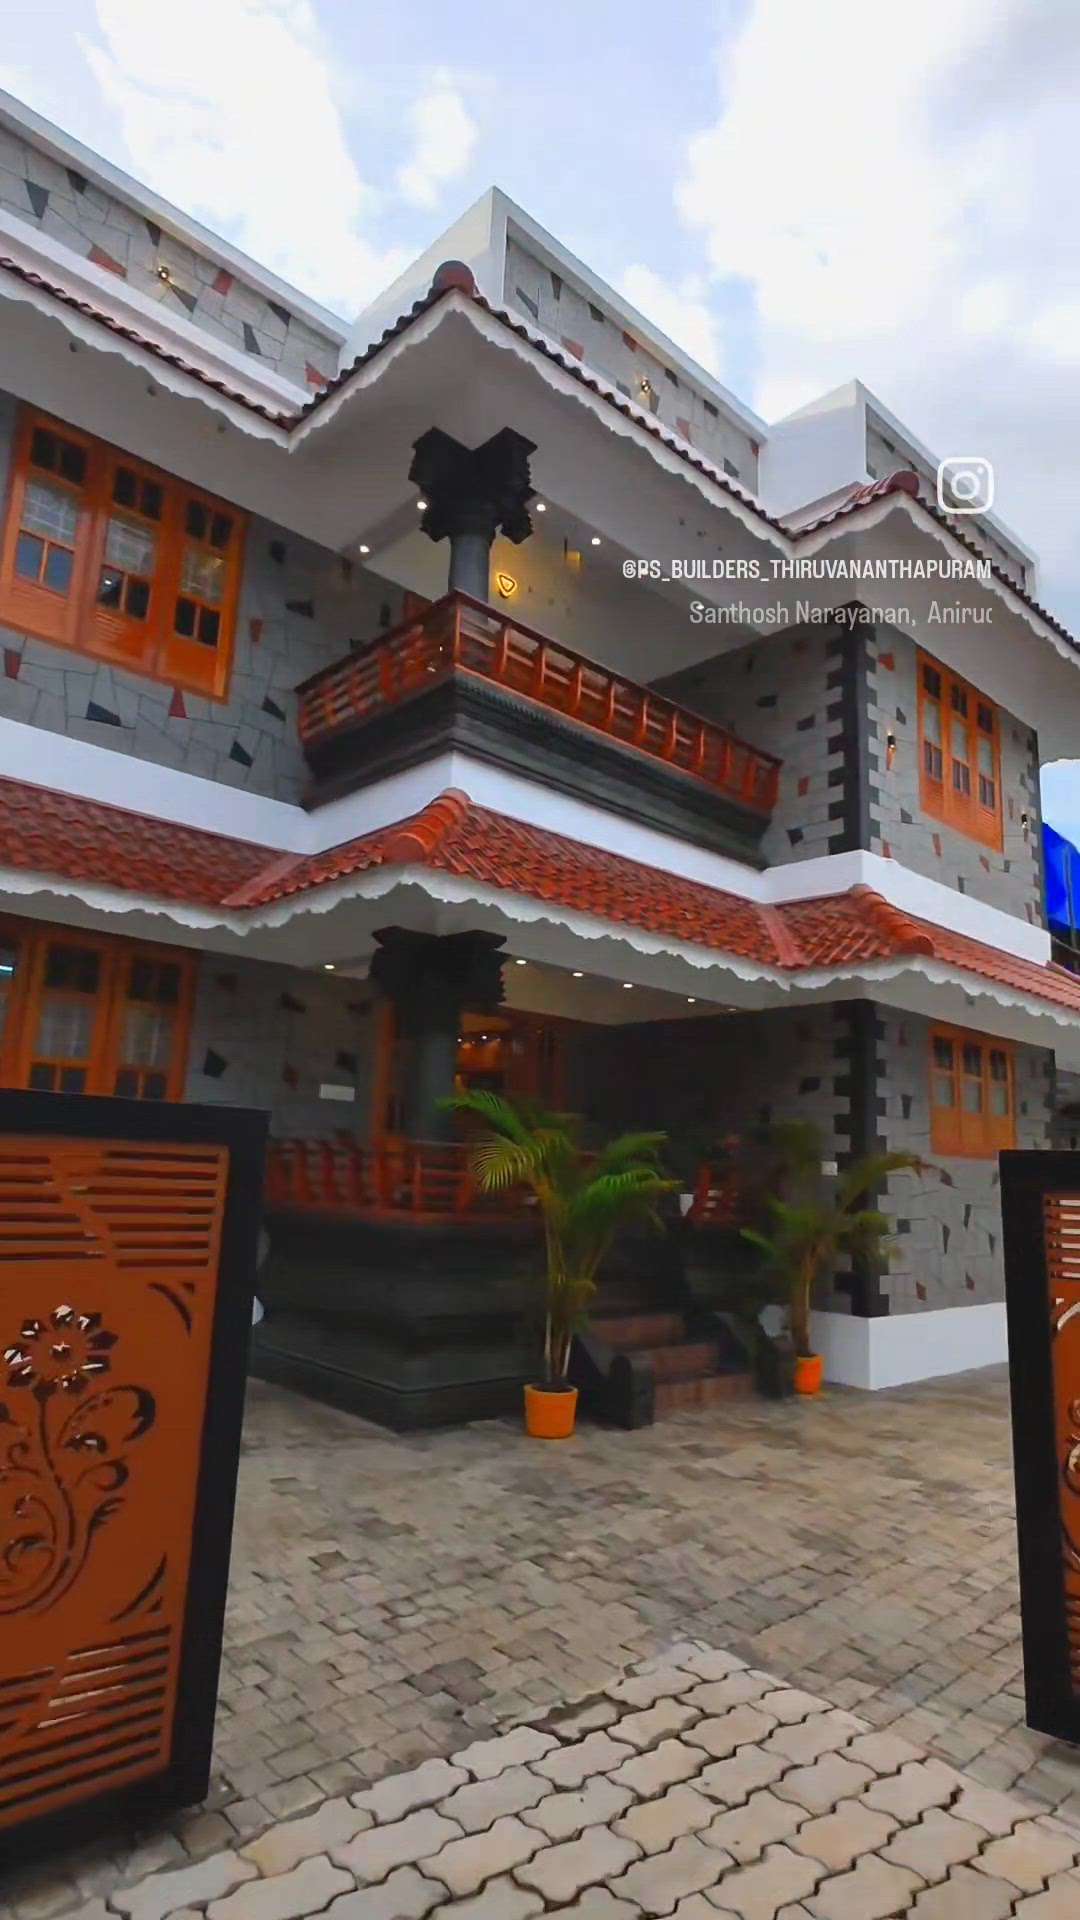 🏠 #TraditionalHouse  🤝 SPACIOUS 🤝 AND 🤝  #luxurious S 🏠 FOR 🏠 #Thiruvananthapuram 

🤝 CONTACT 🤝 us 🤝+91 80894 30328 🤝🤝🤝a🤝 (thachottukavu)

4km from Thirumala 🚧

10km from trivandrum central💞

15km from trivandrum international airport💥

4.4cent💥

2000sqft💥

4bedrooms💥

Ground #FlooringTiles  with #2BHKHouse 

First floor with 2bed🎭 room 💯 open 👍 terrace 🛁, balcony 🎭💯

One 🤝 washrooms 🎭 have 💯 bathtub 👍 🛁

87lakh (negotiable 👍) 🤝

Spacious 🛁 hall 🤝 with 🎭 dining 💯 area 👍 Mod 🛁ailable Fully branded fittings used in 🏗️🚧

Contact for more details 🙂 #HouseDesigns